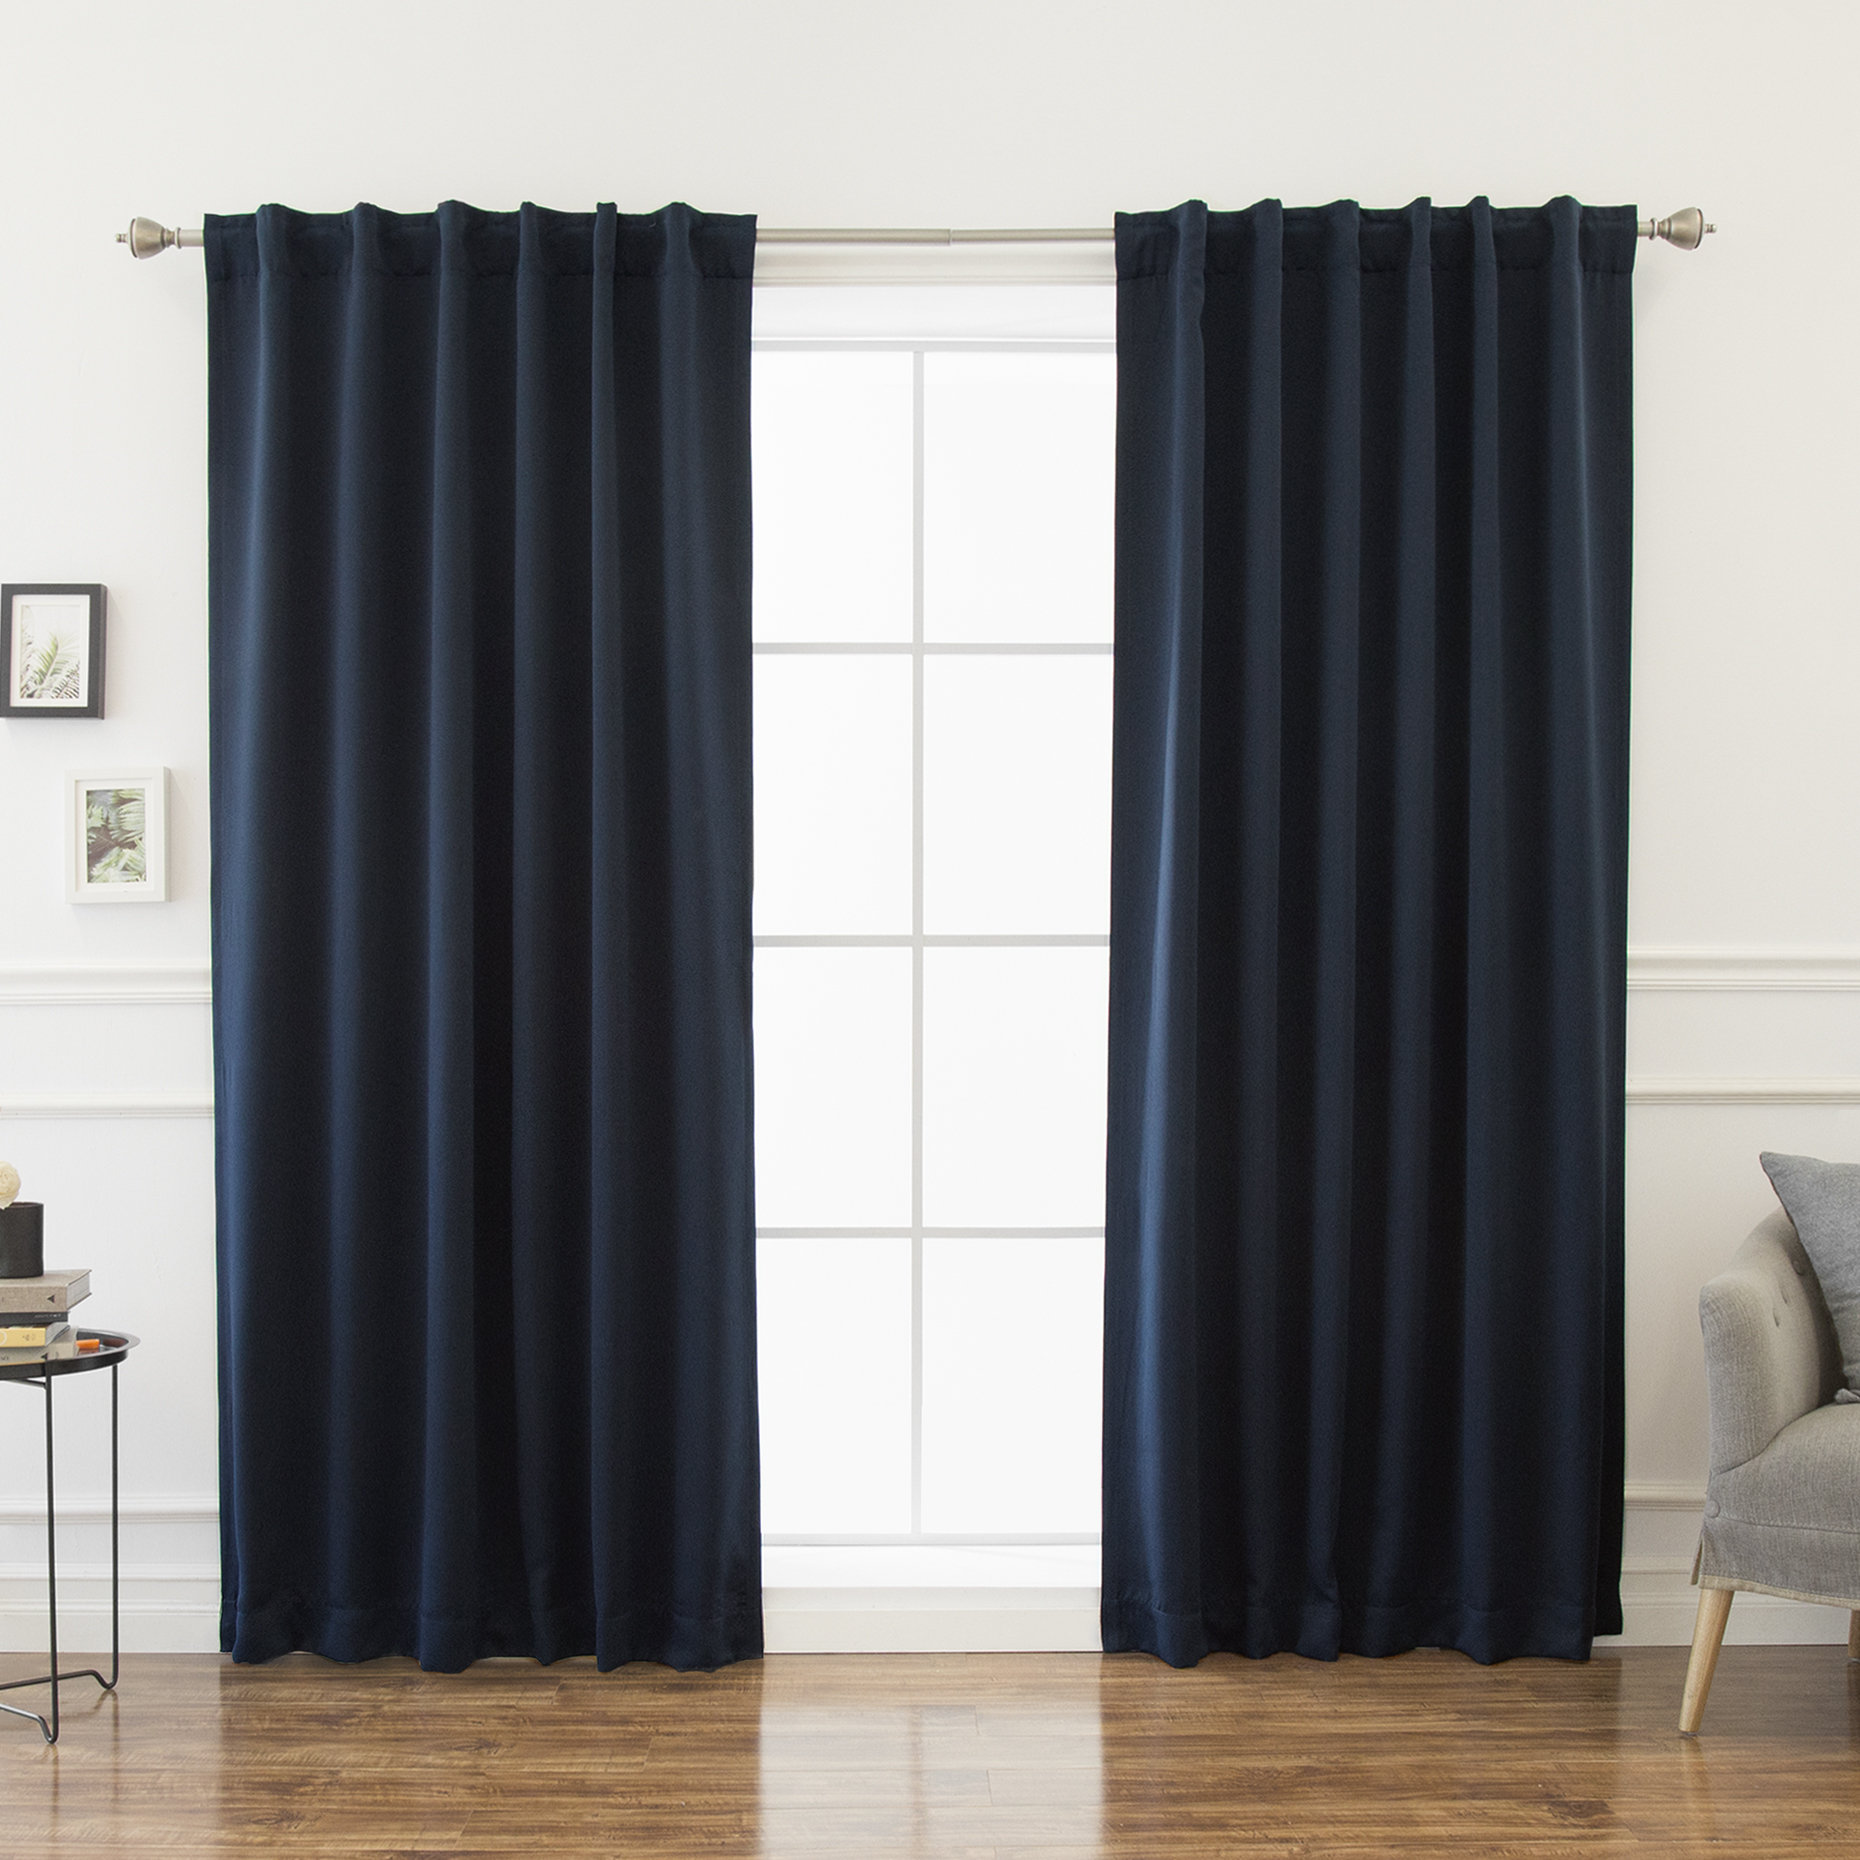 Beachcrest Home Sweetwater Solid Blackout Thermal Rod Pocket Double Curtains Reviews Wayfair